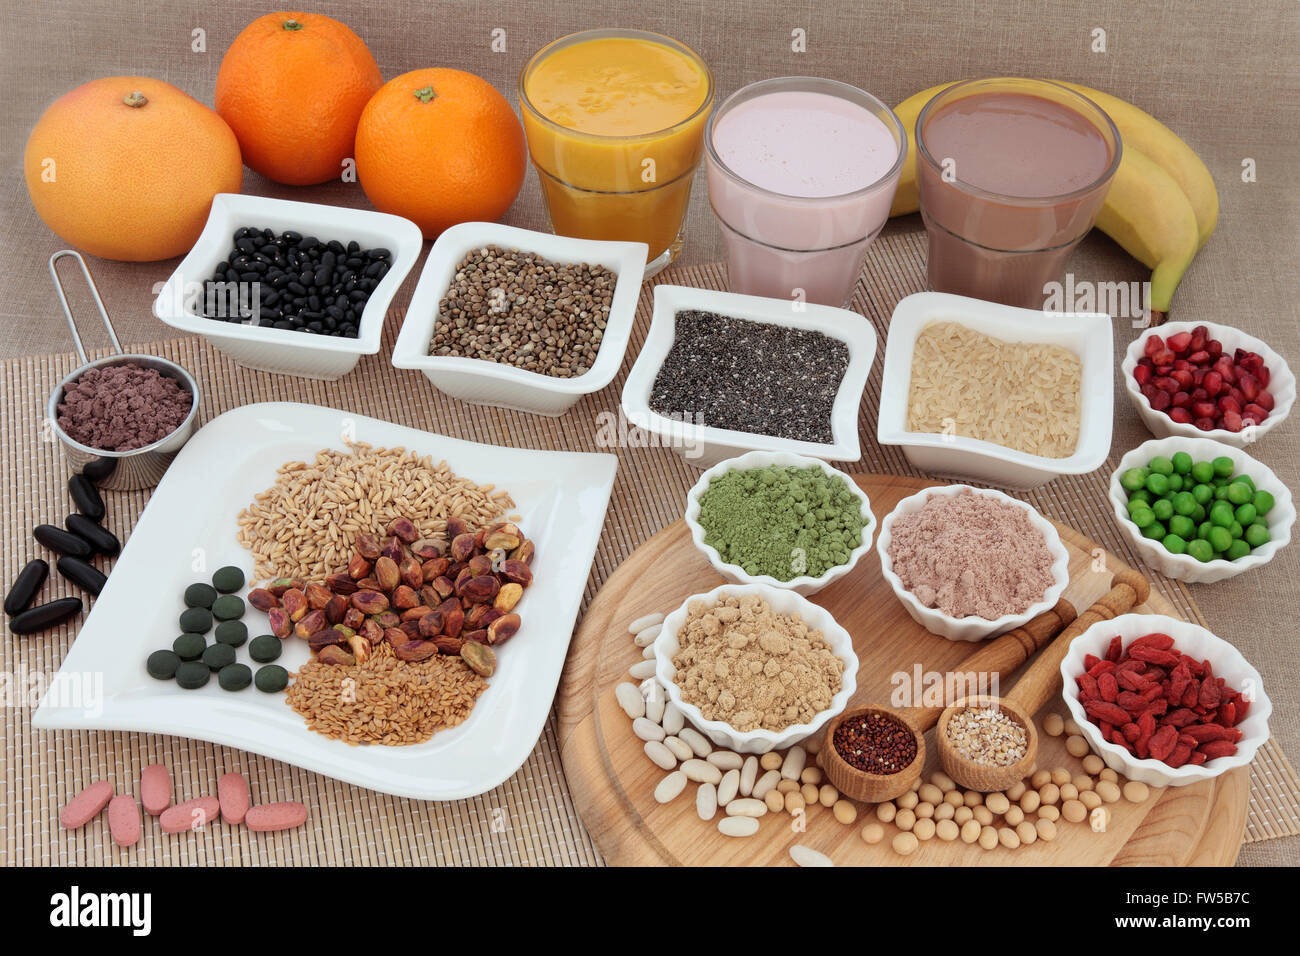 Body building high protein food with supplement powders, vitamin pills, fruit smoothie shakes, grains, seeds, fruit and nuts Stock Photo